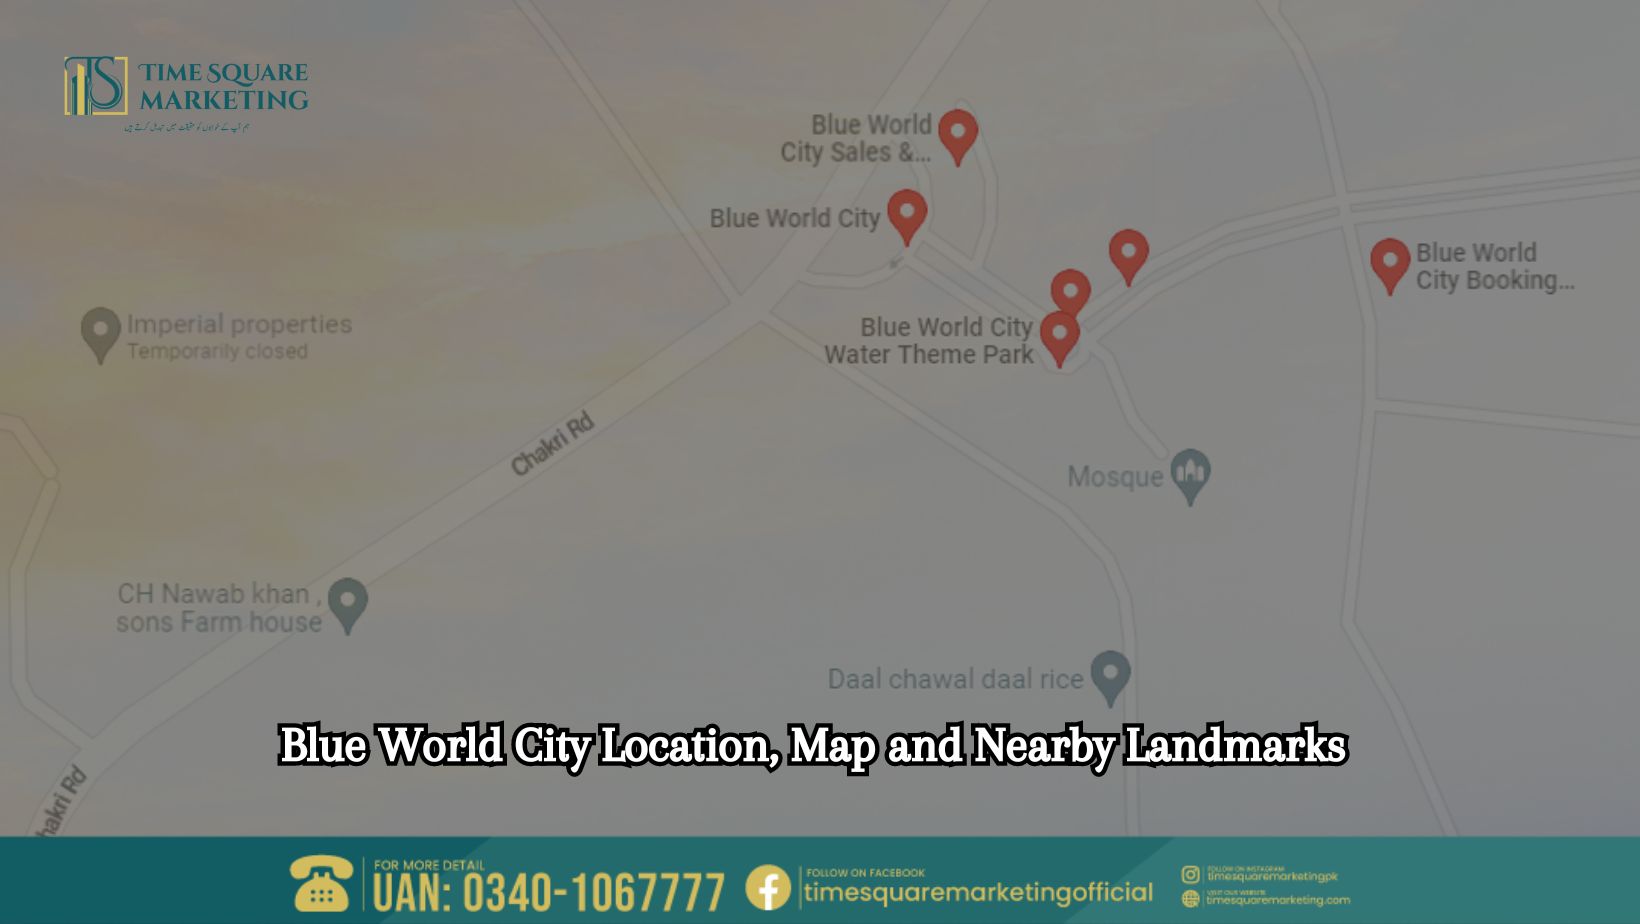 Blue World City Location, Map and Nearby Landmarks